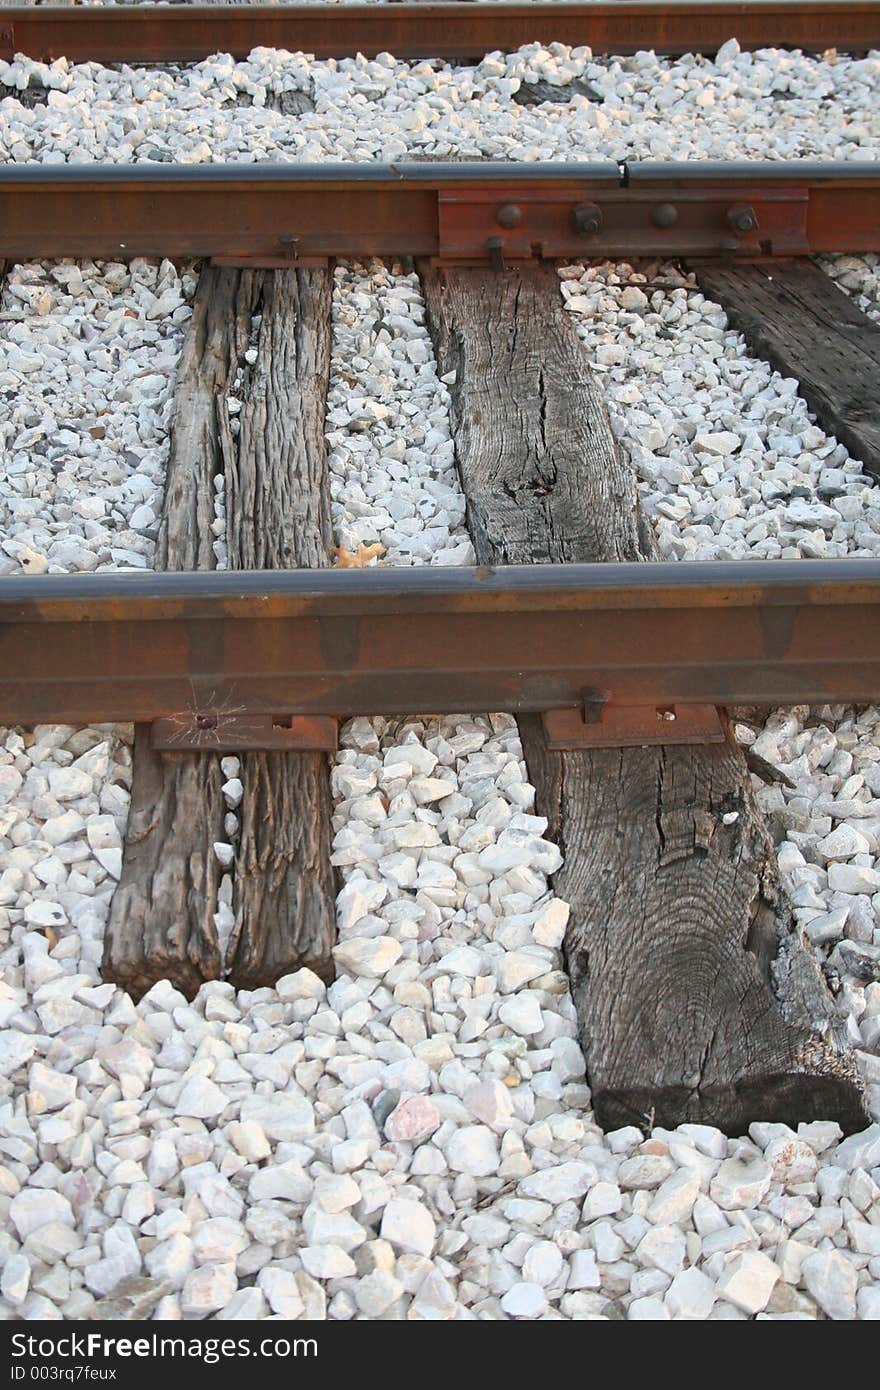 Cross-section of railroad tracks surrounded by white stones. Cross-section of railroad tracks surrounded by white stones.